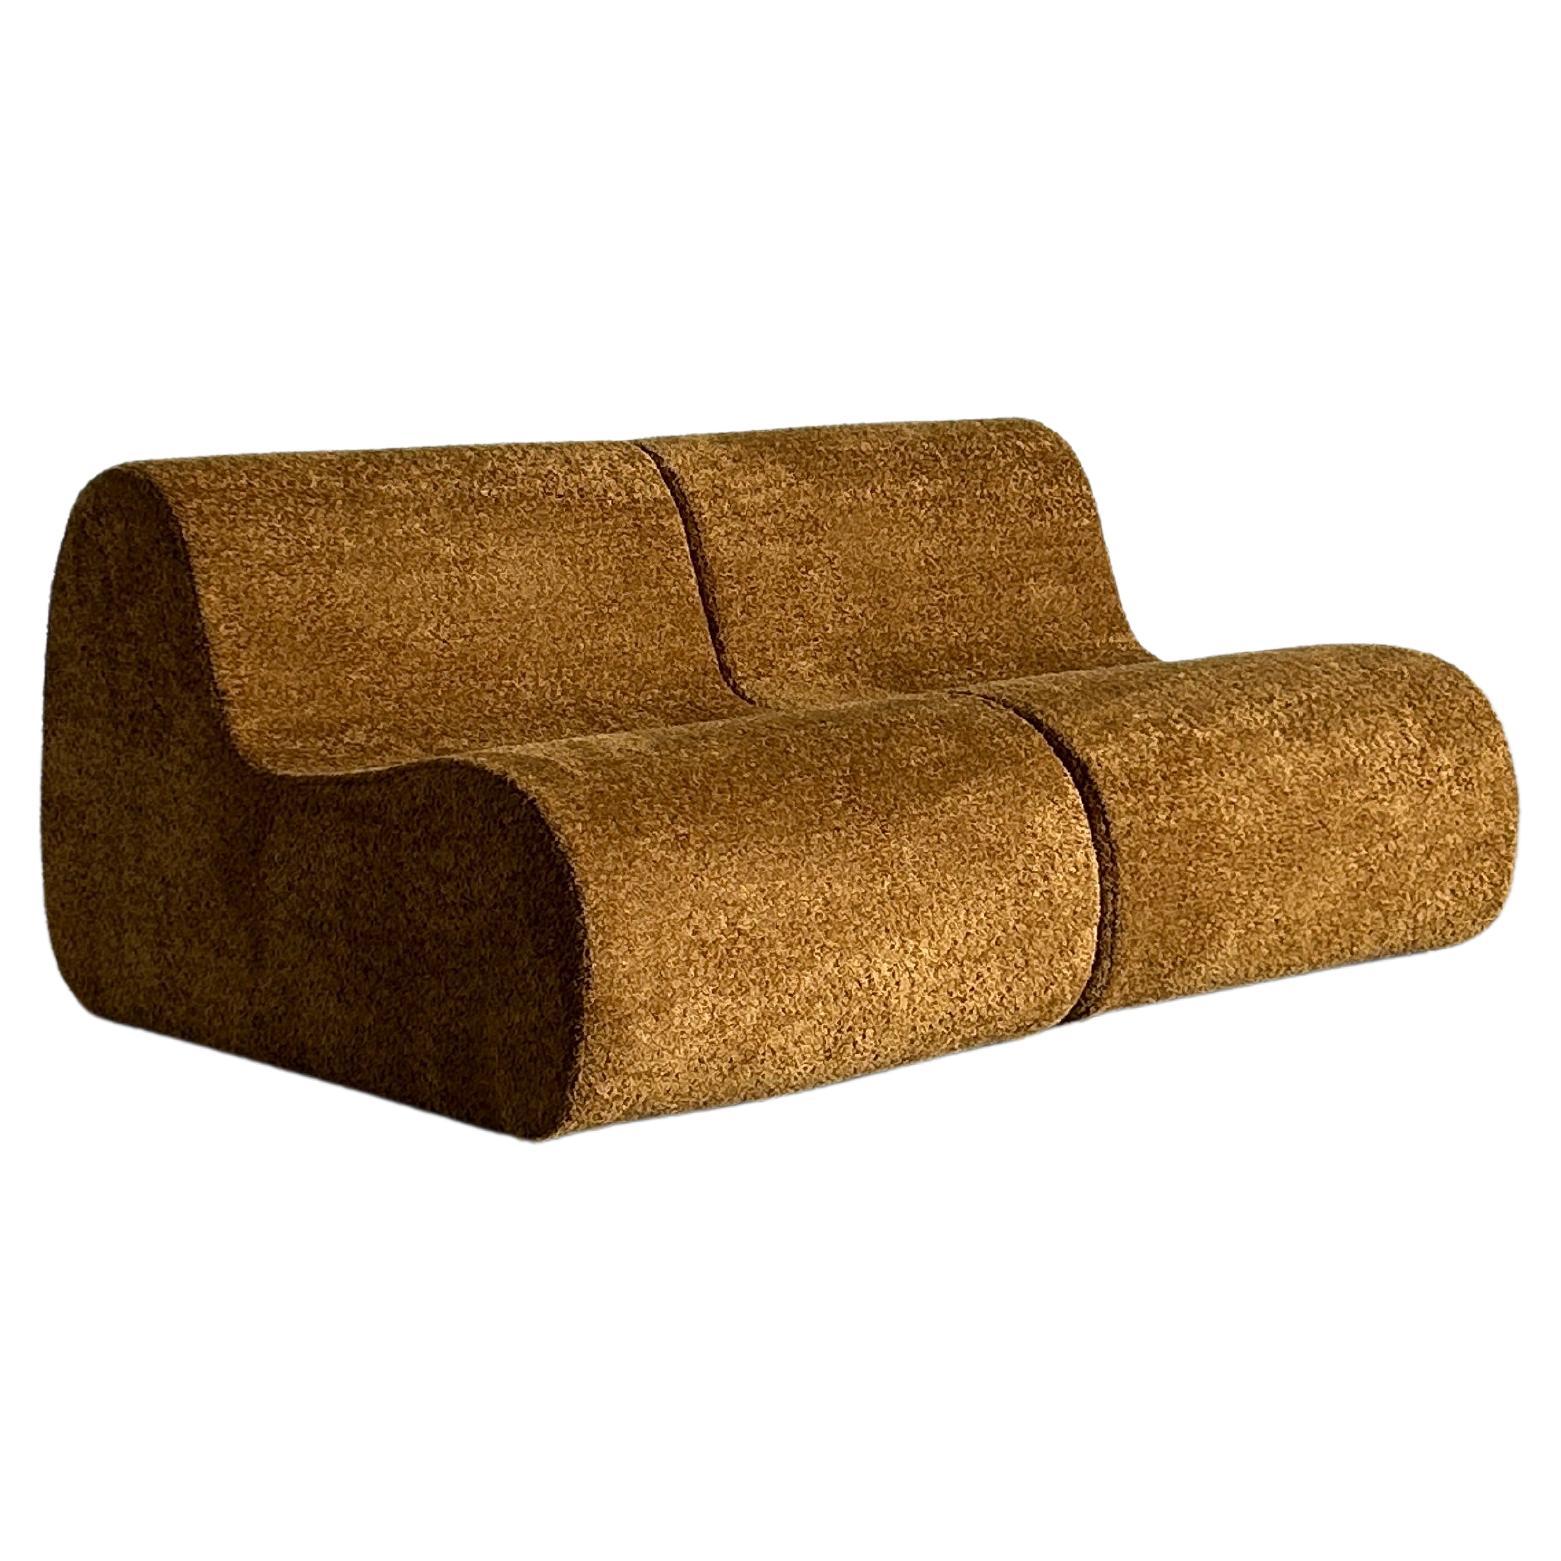 Pair of Italian Mid-Century-Modern Lounge Chairs in Ochre Boucle, 1970s Italy For Sale